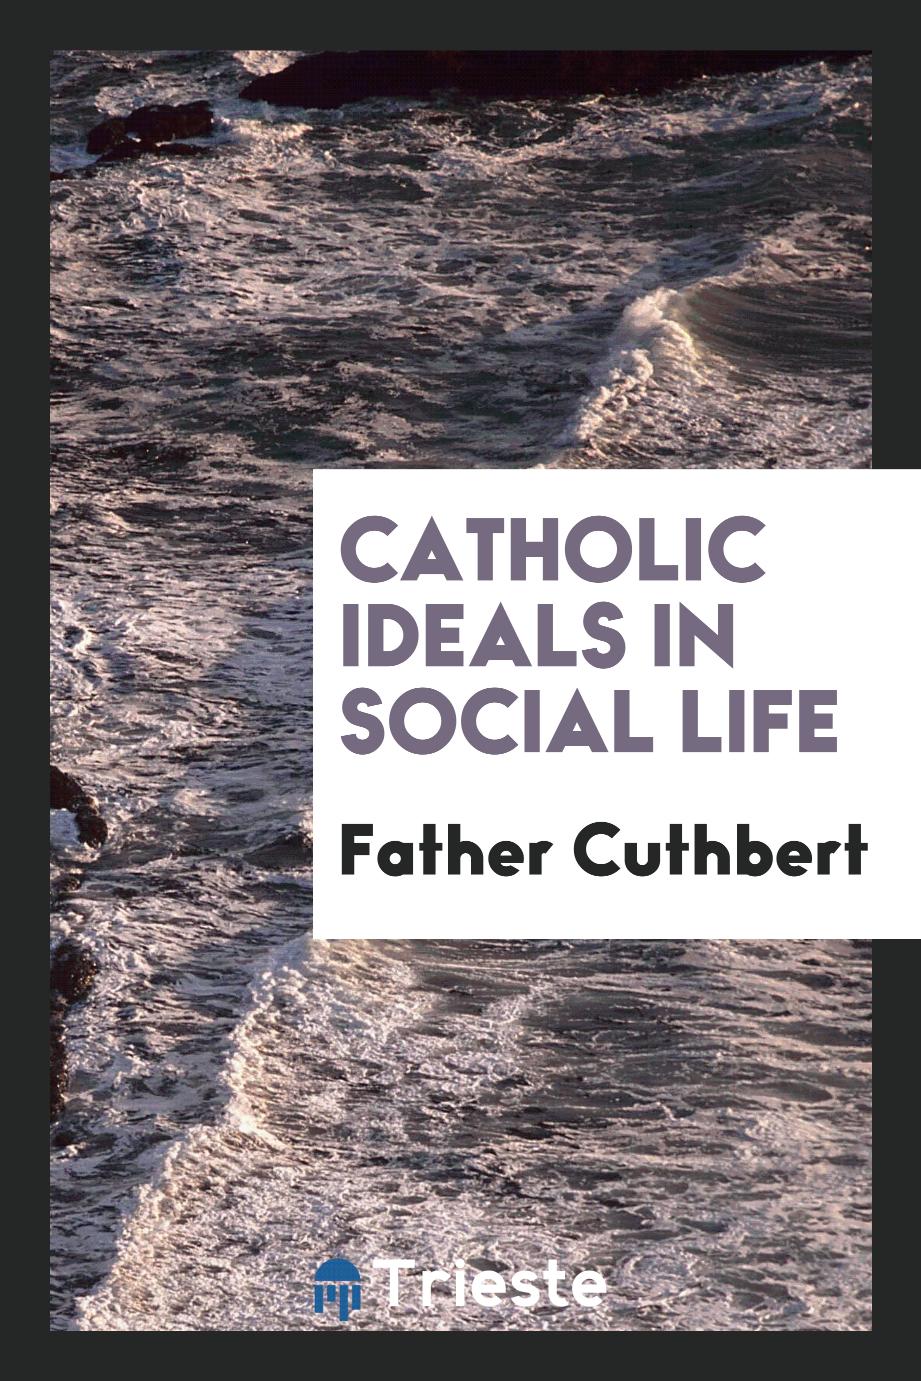 Father Cuthbert - Catholic ideals in social life